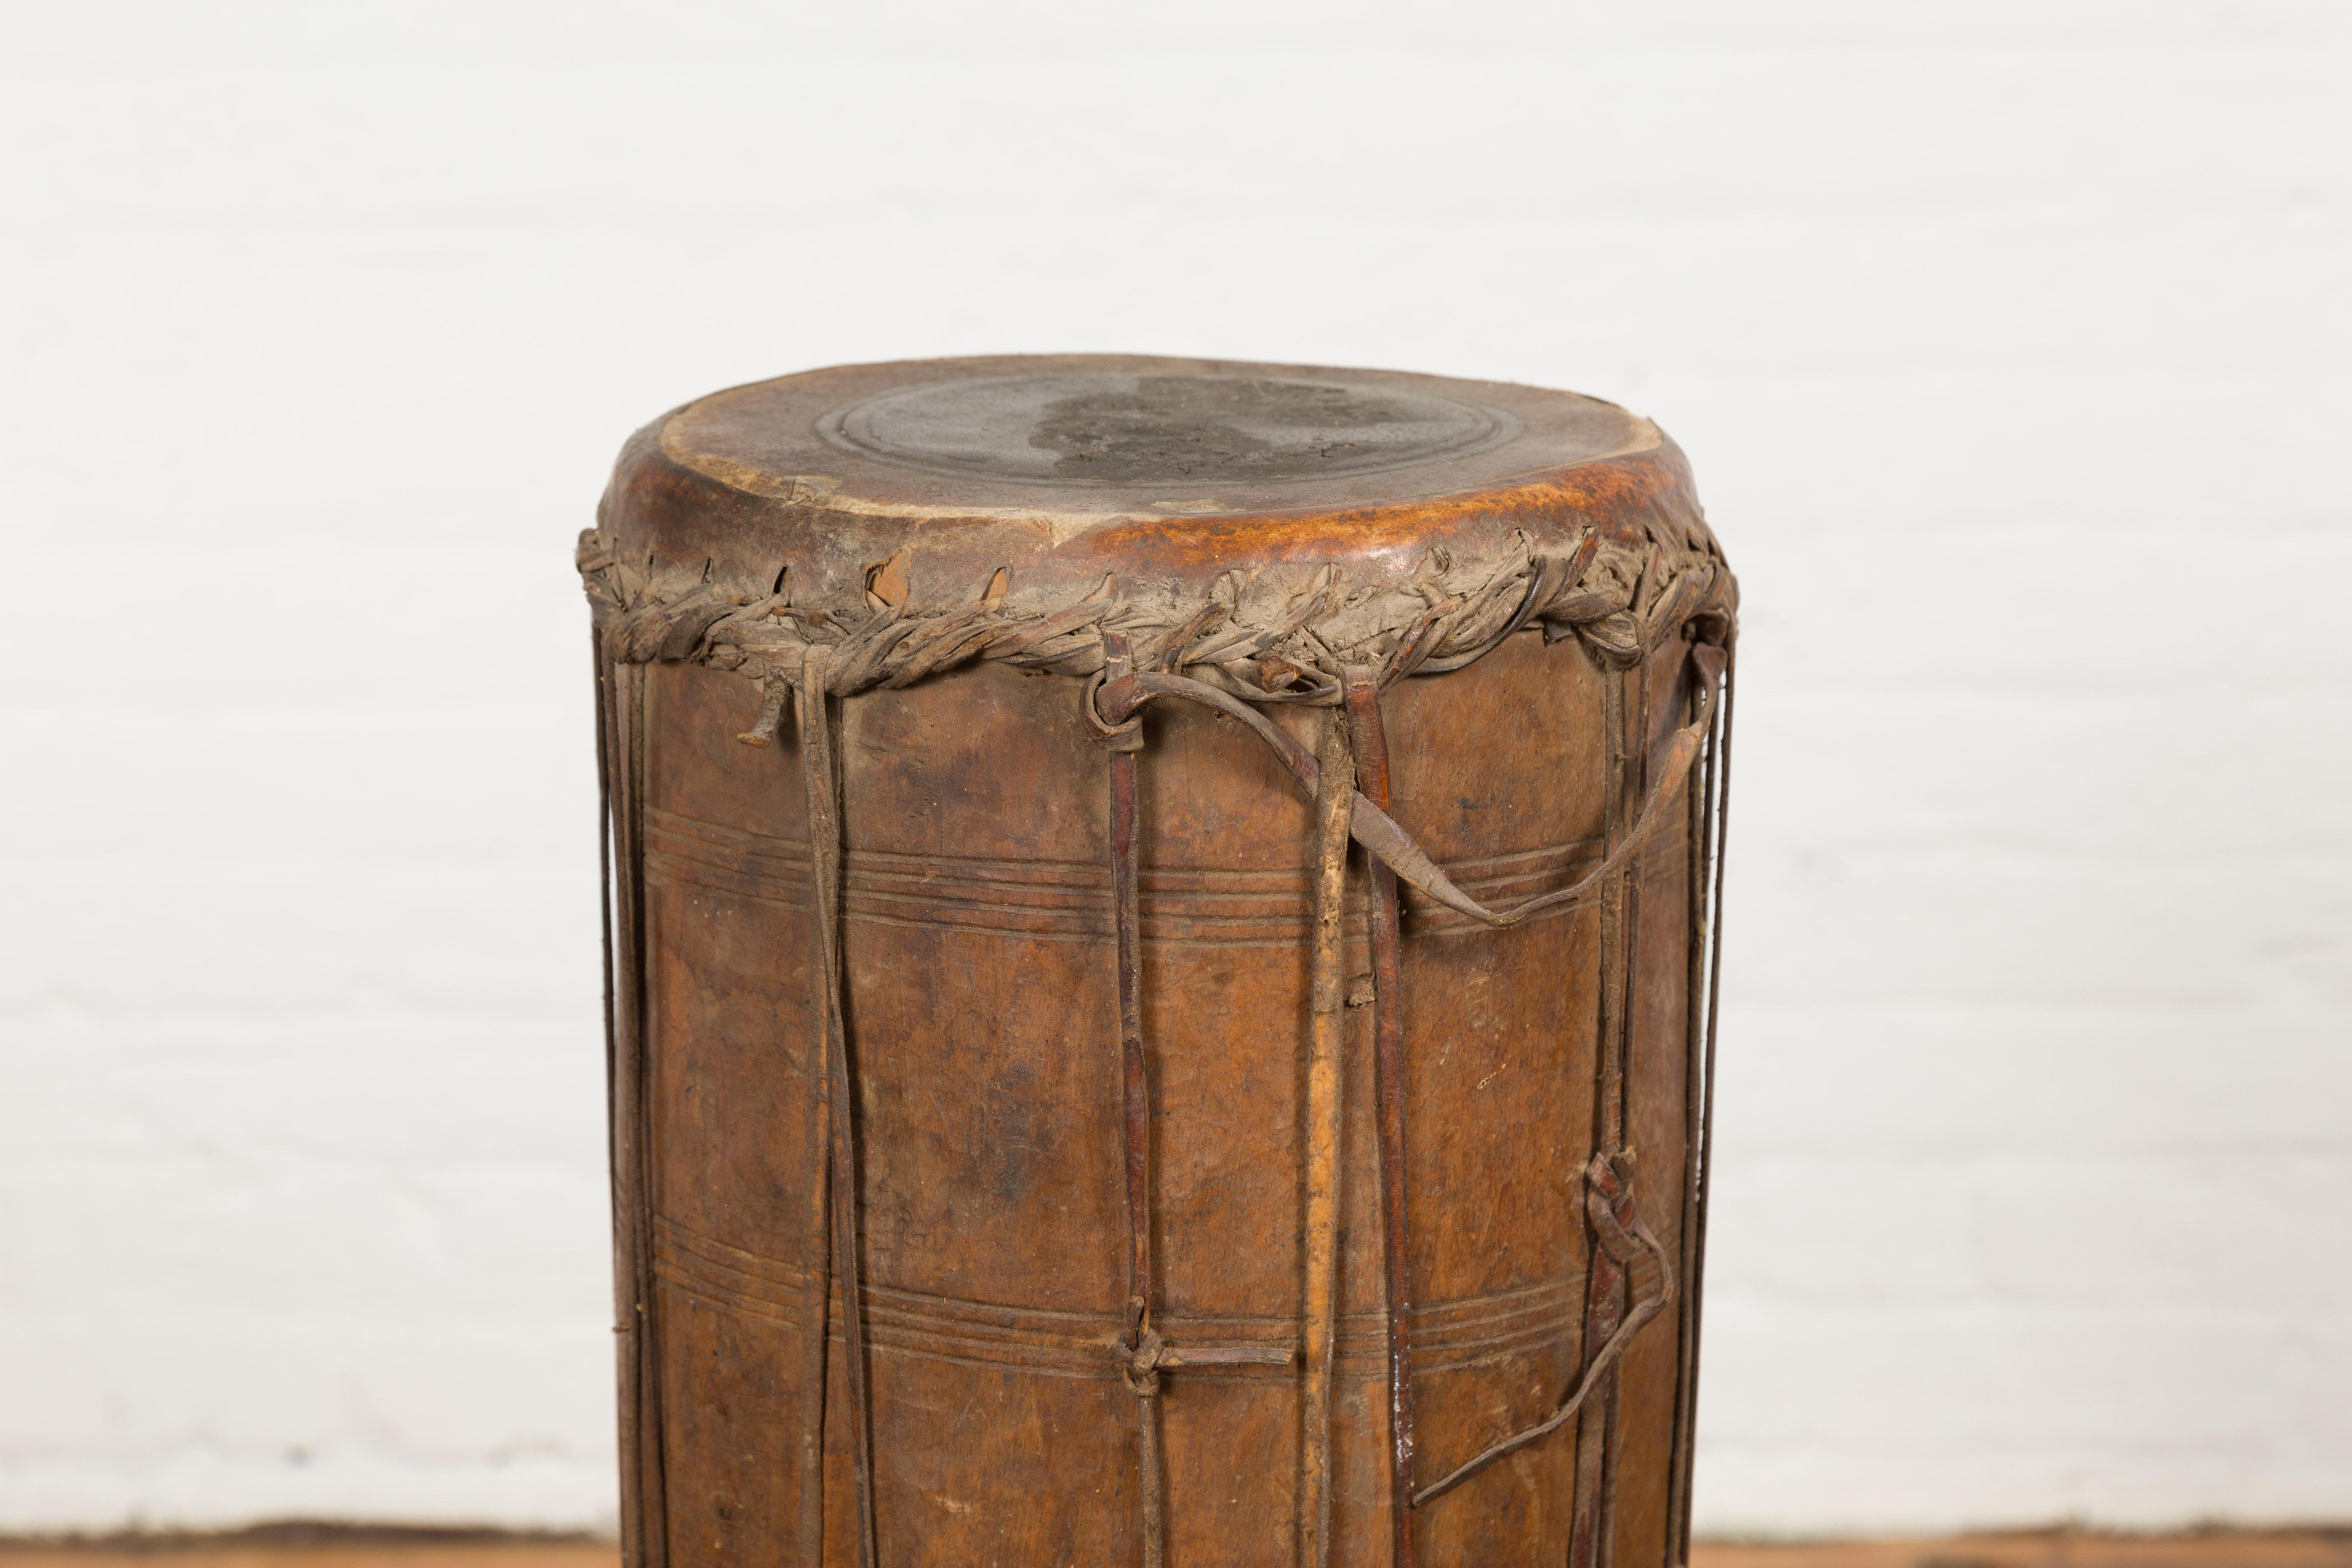 Antique Thai 19th Century Wood and Leather Klong Khaek Processional Drum In Good Condition For Sale In Yonkers, NY